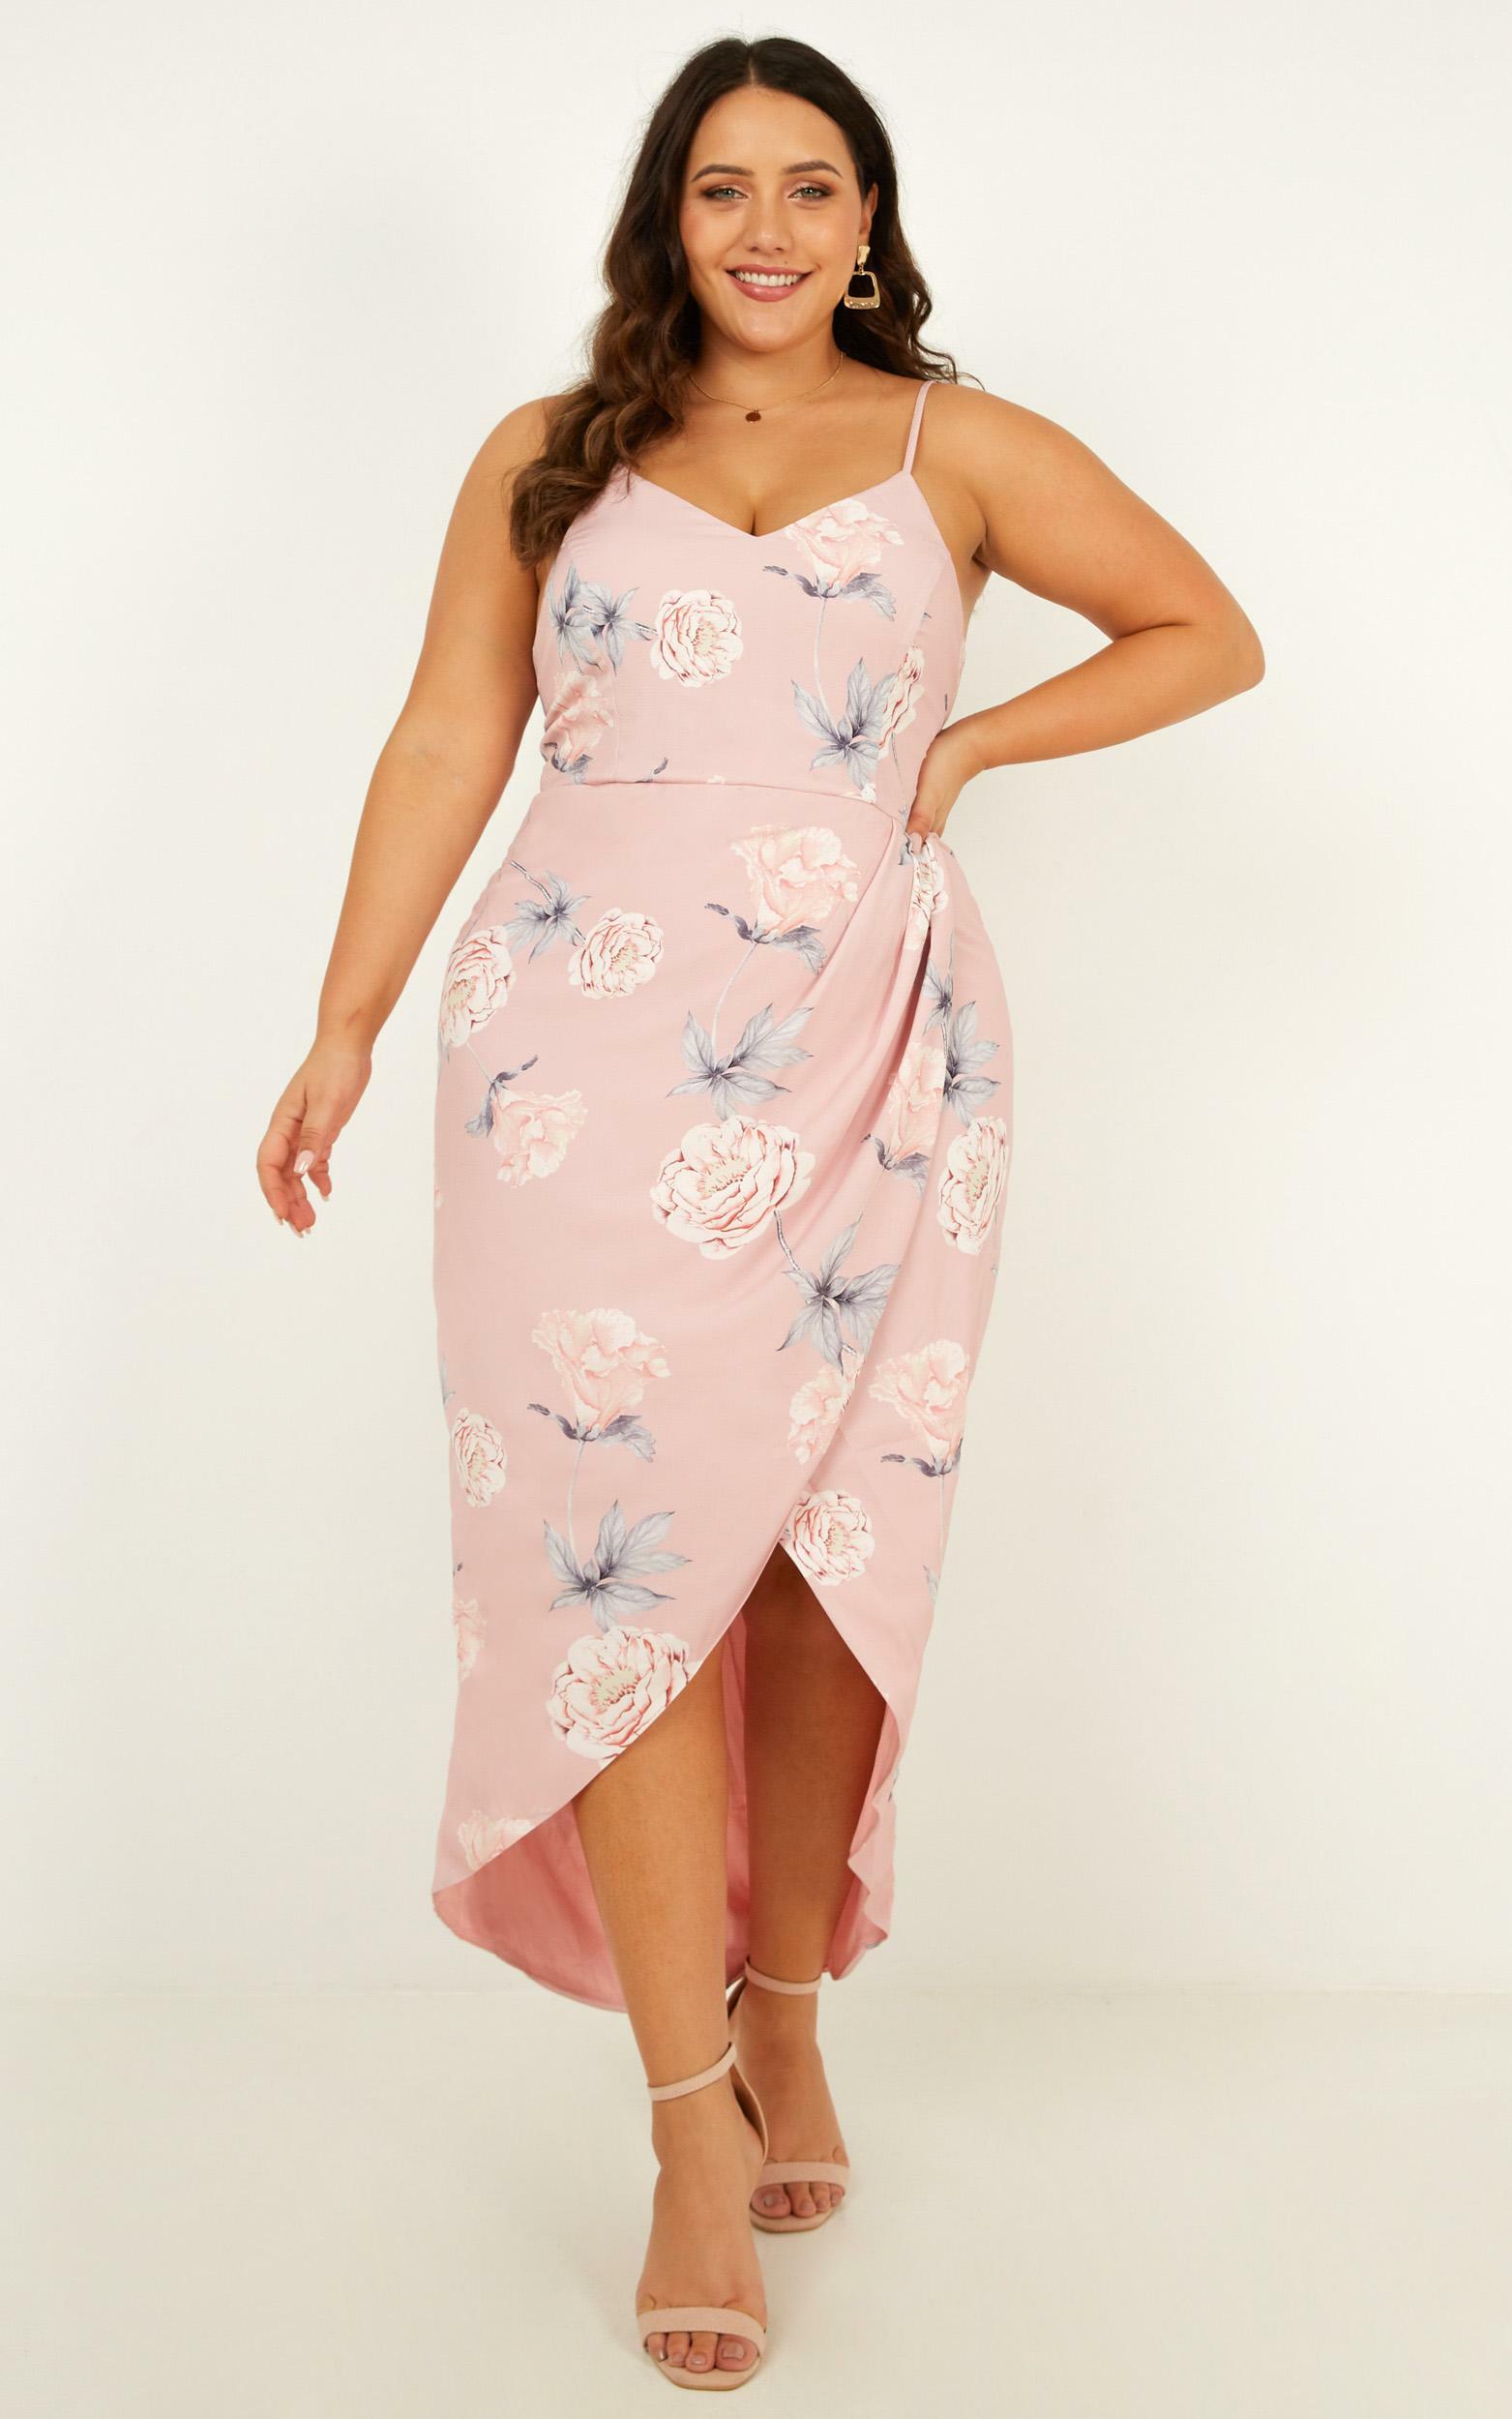 Just This Once Dress in Blush Floral - 06, PNK1, hi-res image number null